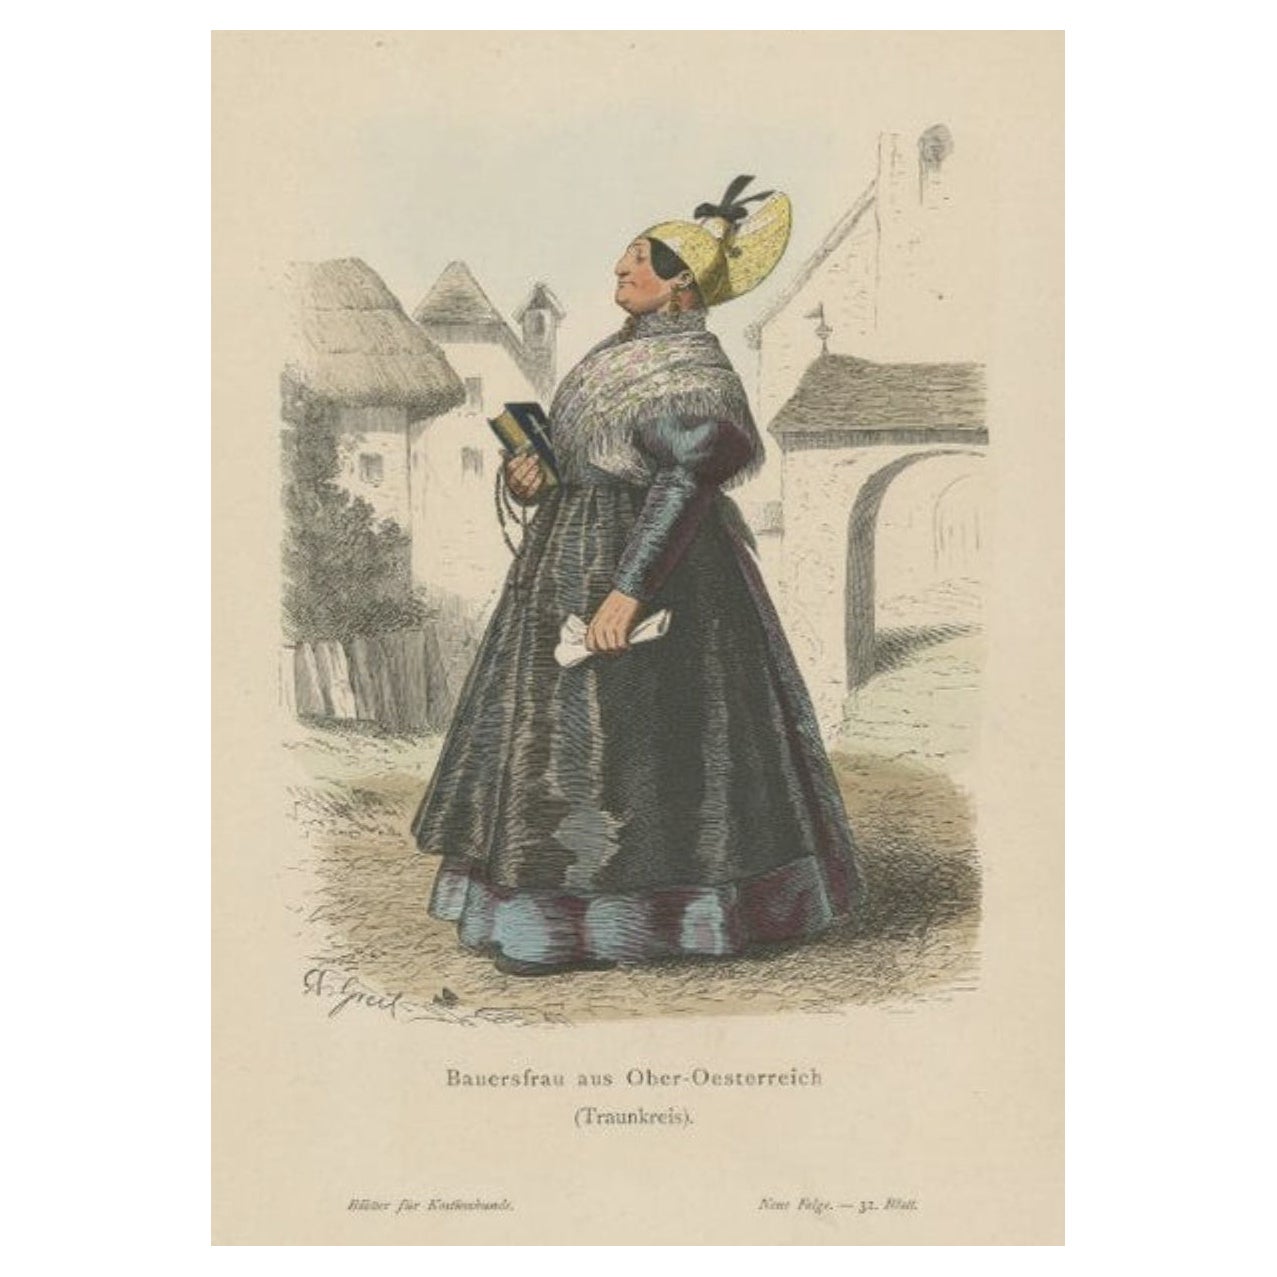 Antique Costume Print of a Farmer's Wife from the Region of Traunkreis, c.1880